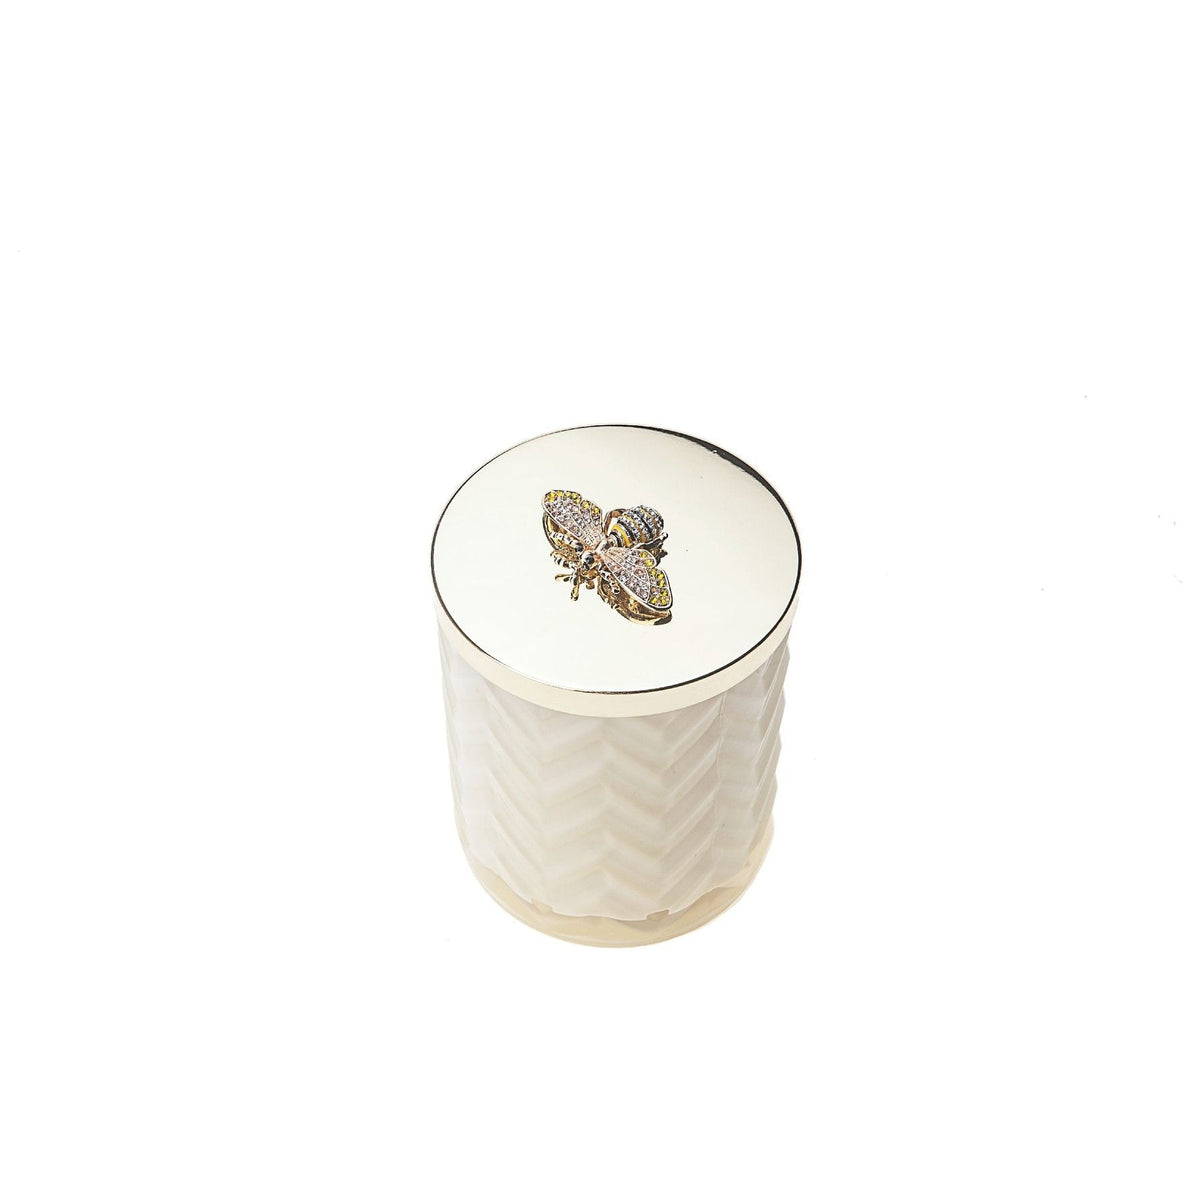 COTE NOIRE | HERRINGBONE CANDLE WITH SCARF BLOND VANILLA - CREAM &amp; GOLDEN BEE LID